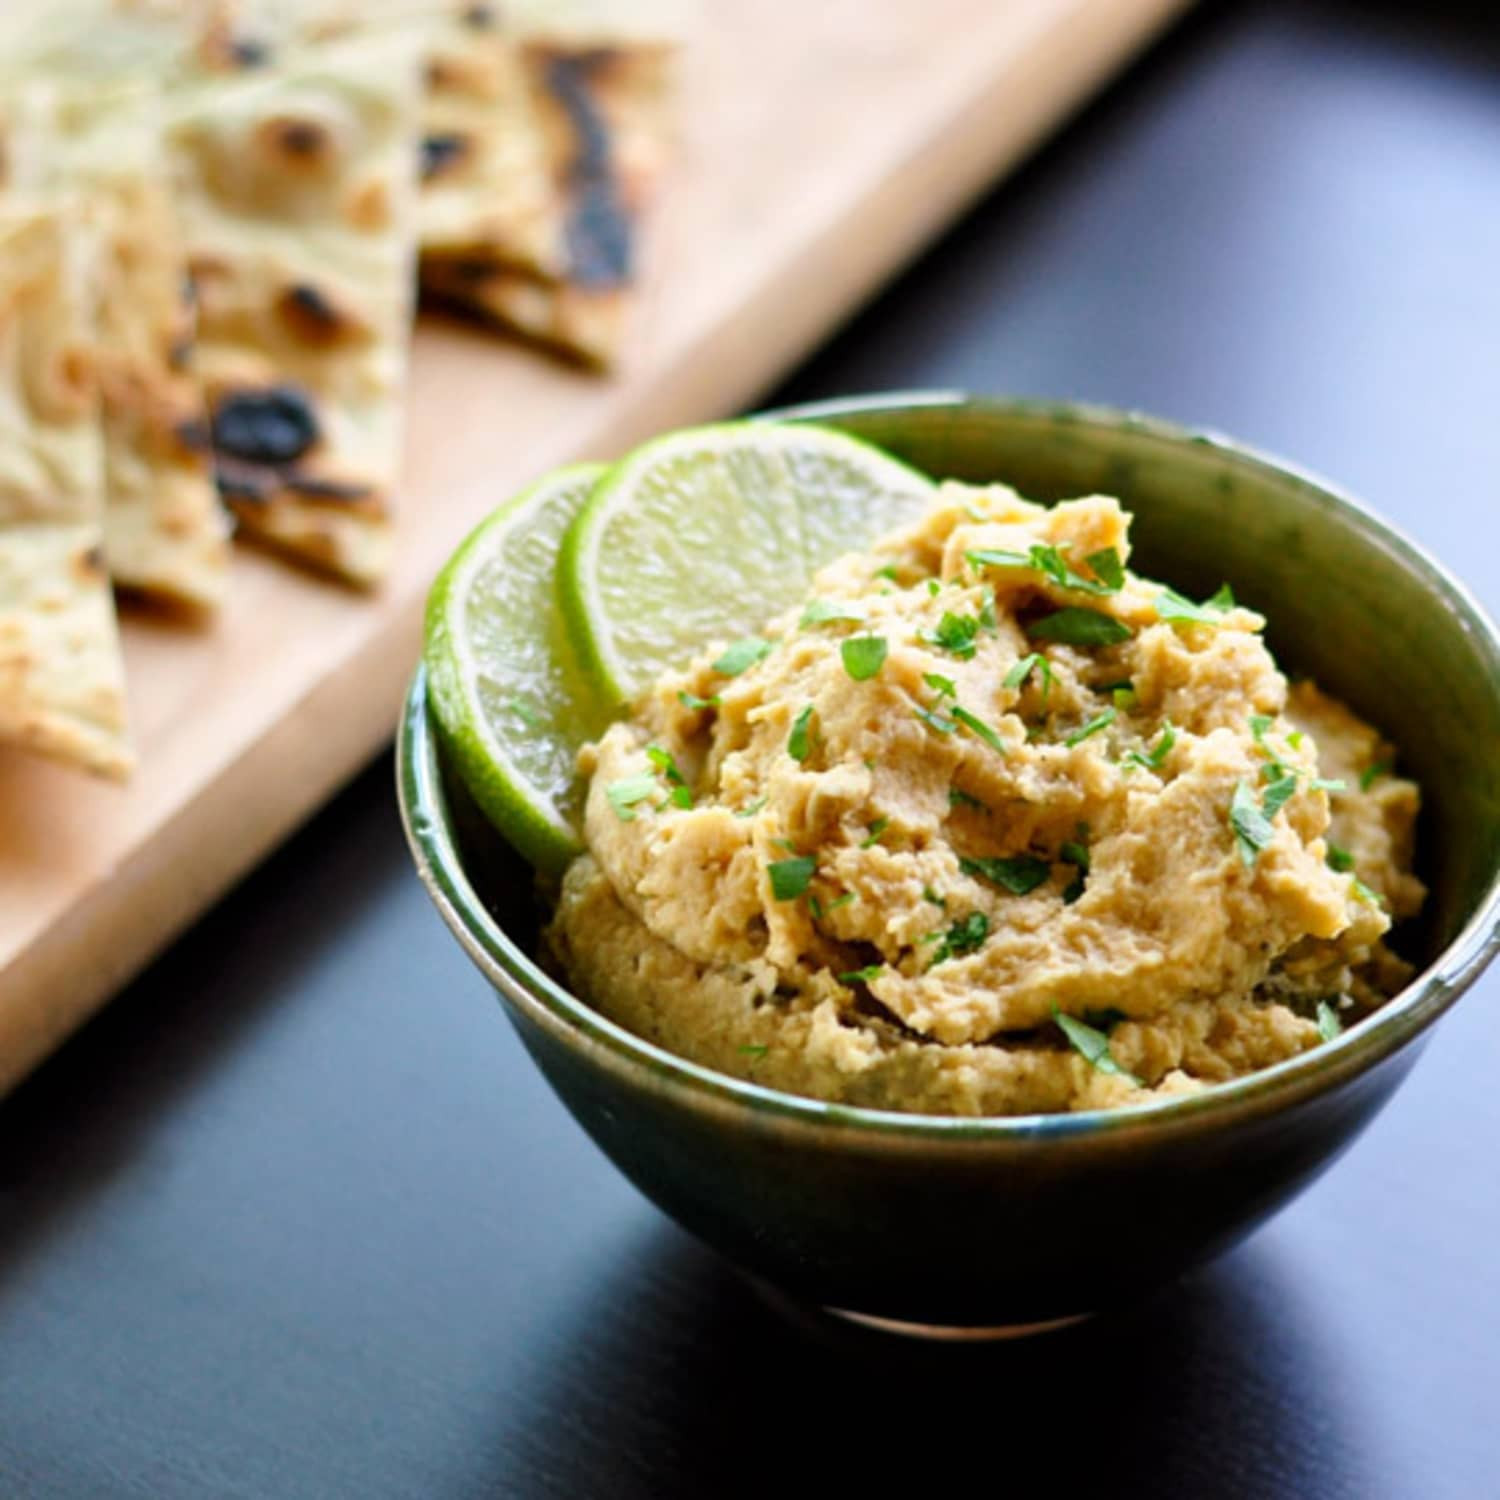 Appetizers without Cheese New 10 Scrumptious Appetizer Dips &amp; Spreads without Cheese